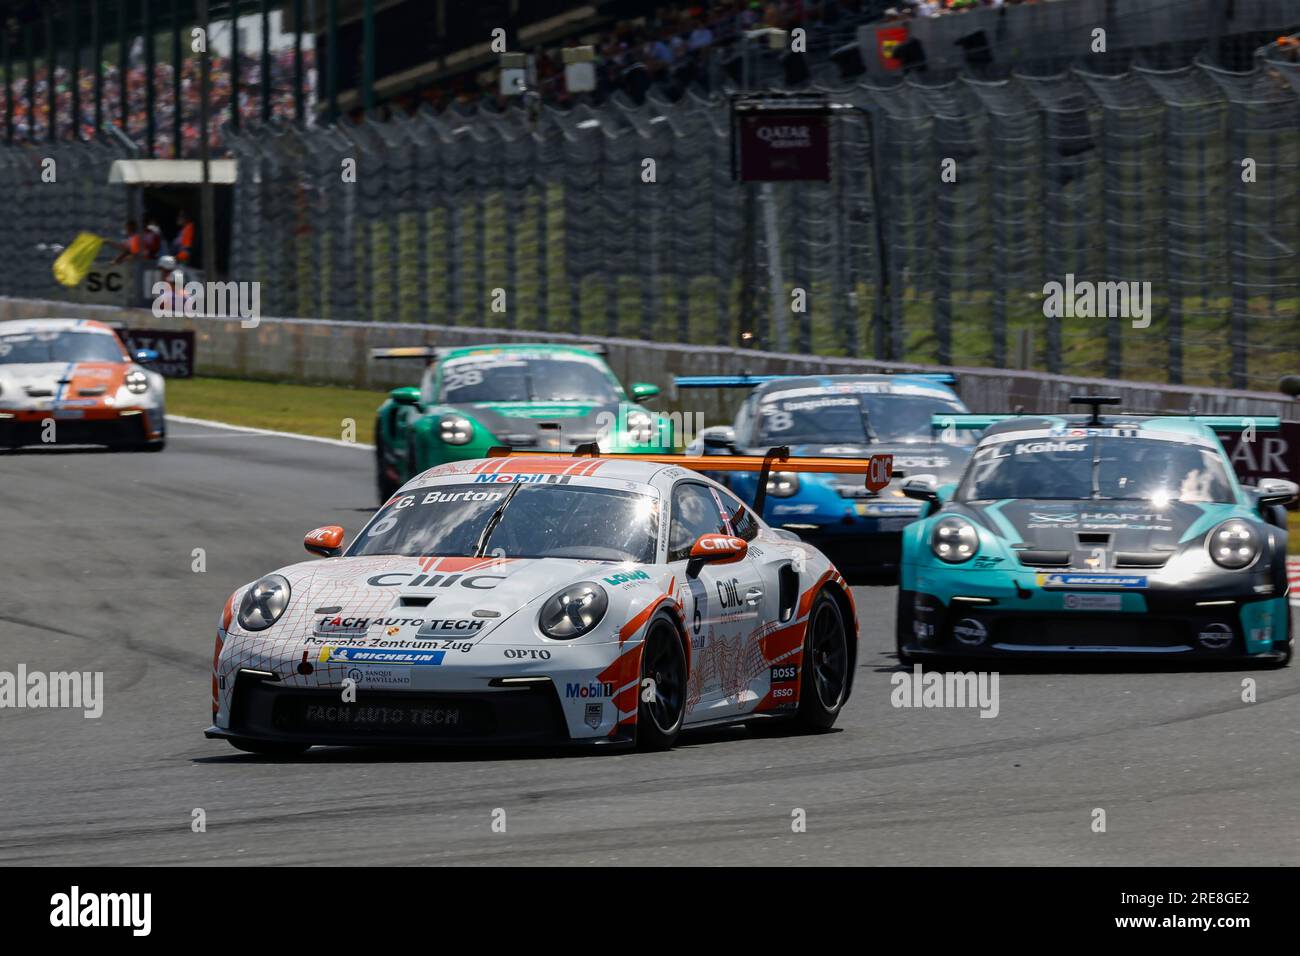 Budapest, Hungary. 23rd July, 2023. #6 Gustav Burton (UK, Fach Auto Tech), Porsche Mobil 1 Supercup at Hungaroring on July 23, 2023 in Budapest, Hungary. (Photo by HIGH TWO) Credit: dpa/Alamy Live News Stock Photo